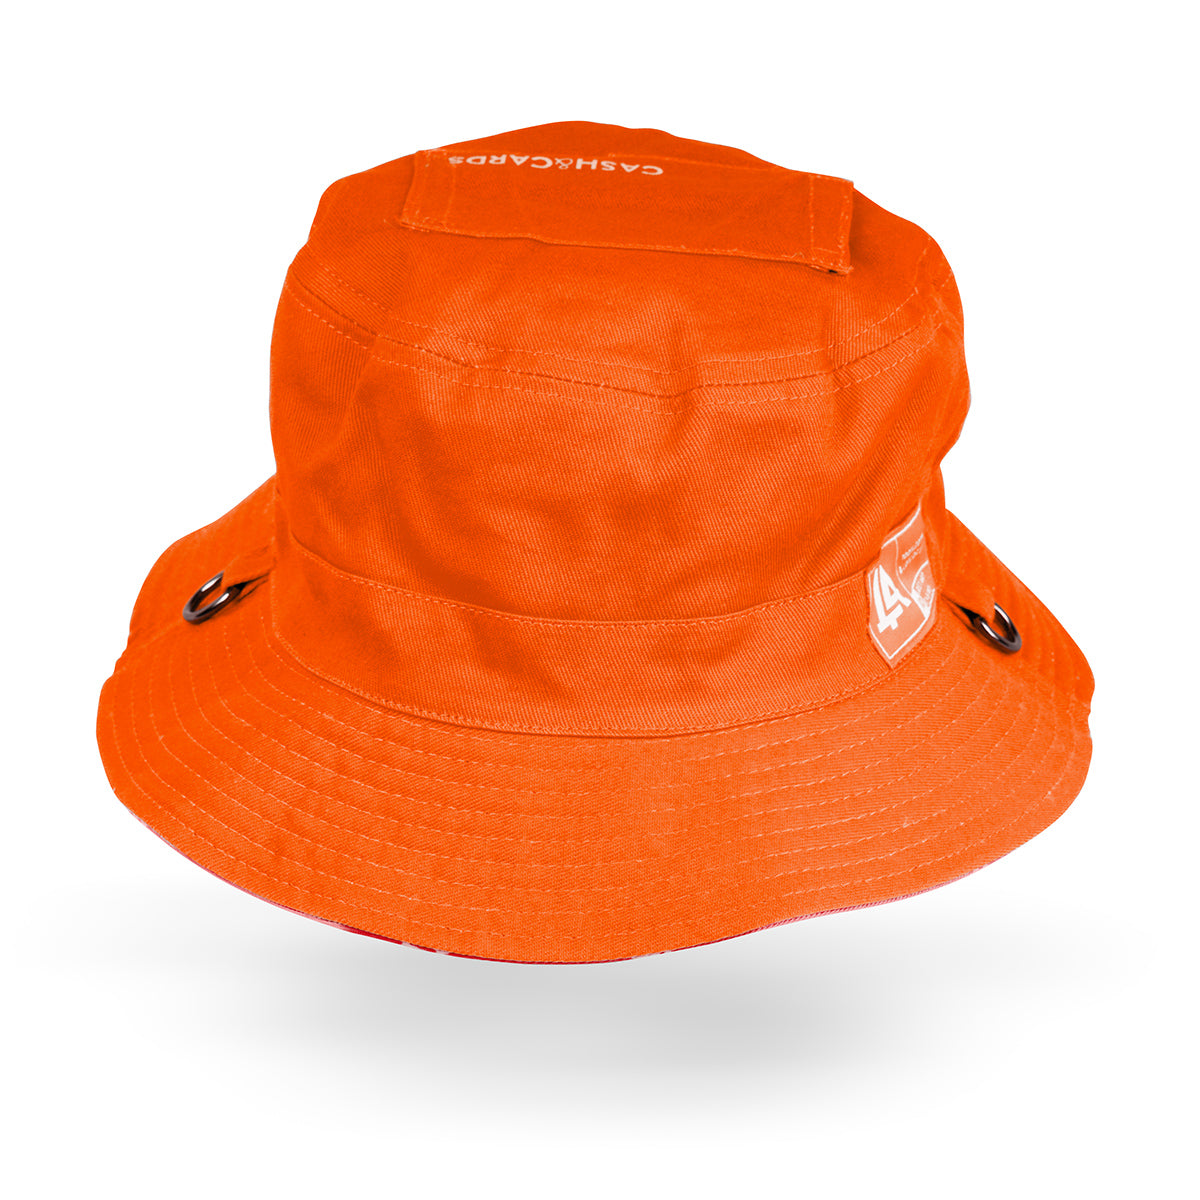 Lost Art Canada - red orange coloured bucket hat inside back view